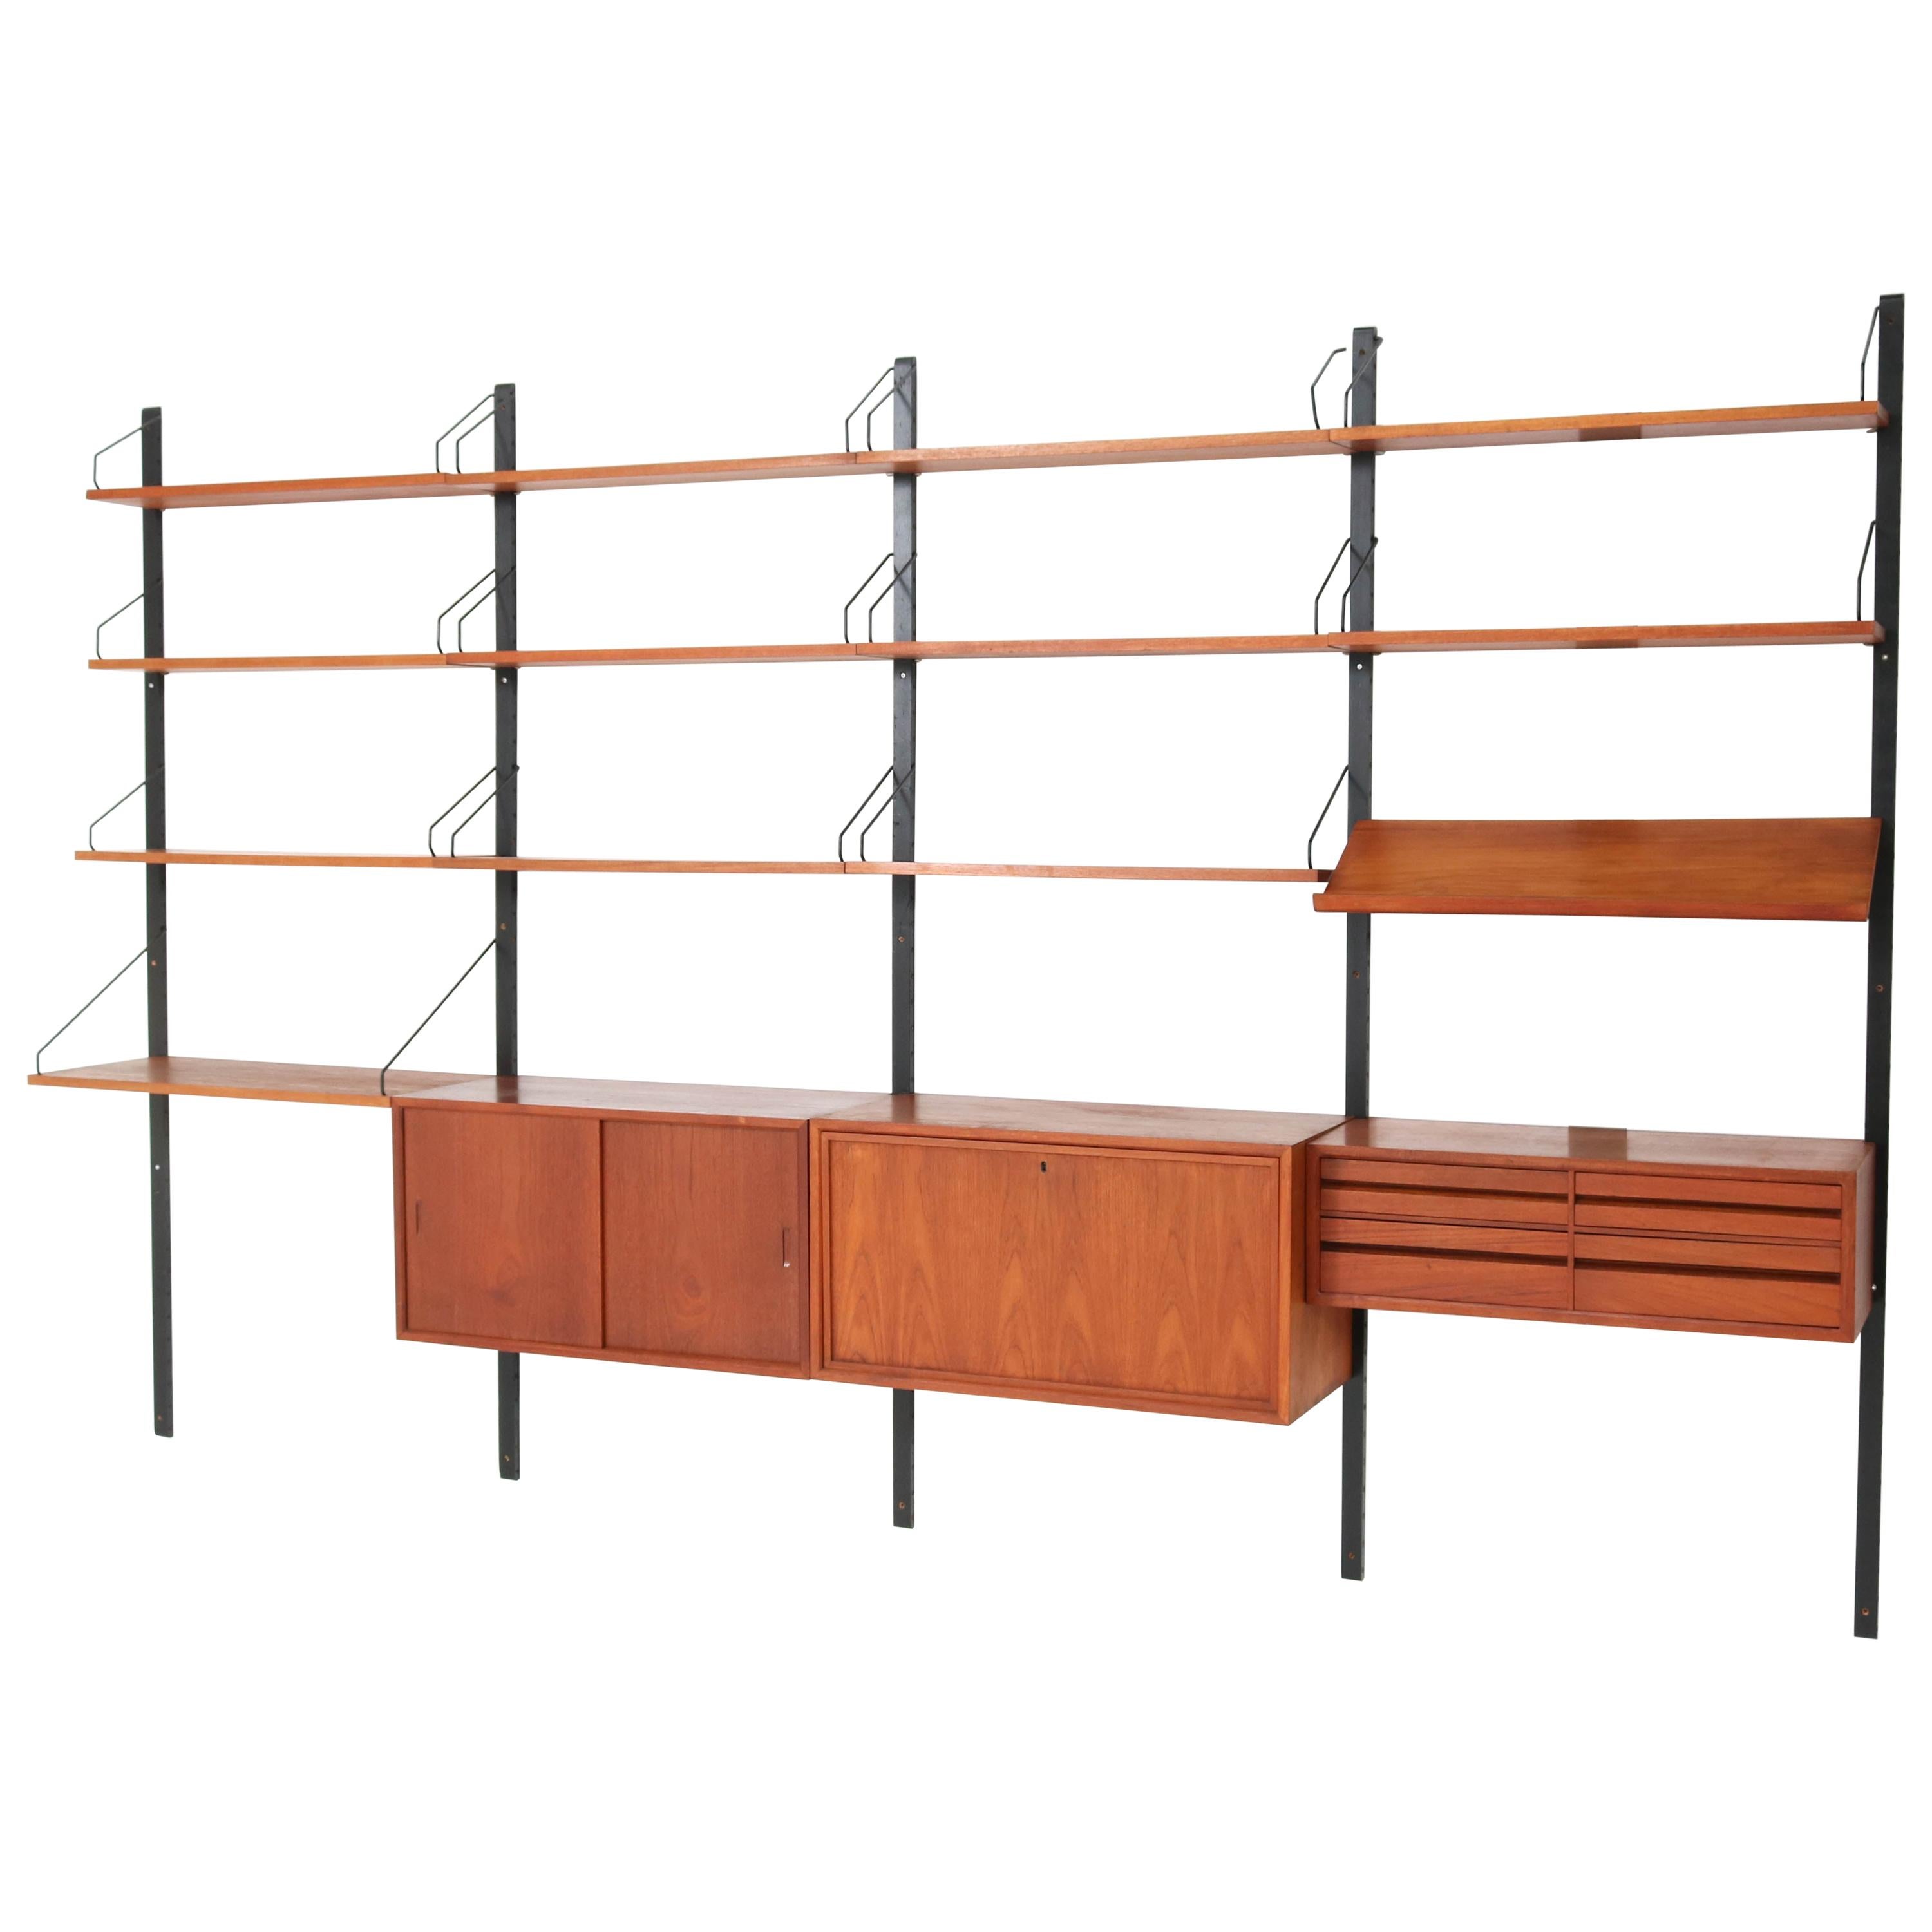 Magnificent large Mid-Century Modern teak wall unit.
Design by Poul Cadovius for Cado.
Striking Danish design from the 1950s
This wonderful wall unit with hard to find magazine shelf consists of
5 black lacquered wooden uprights H 202 cm or